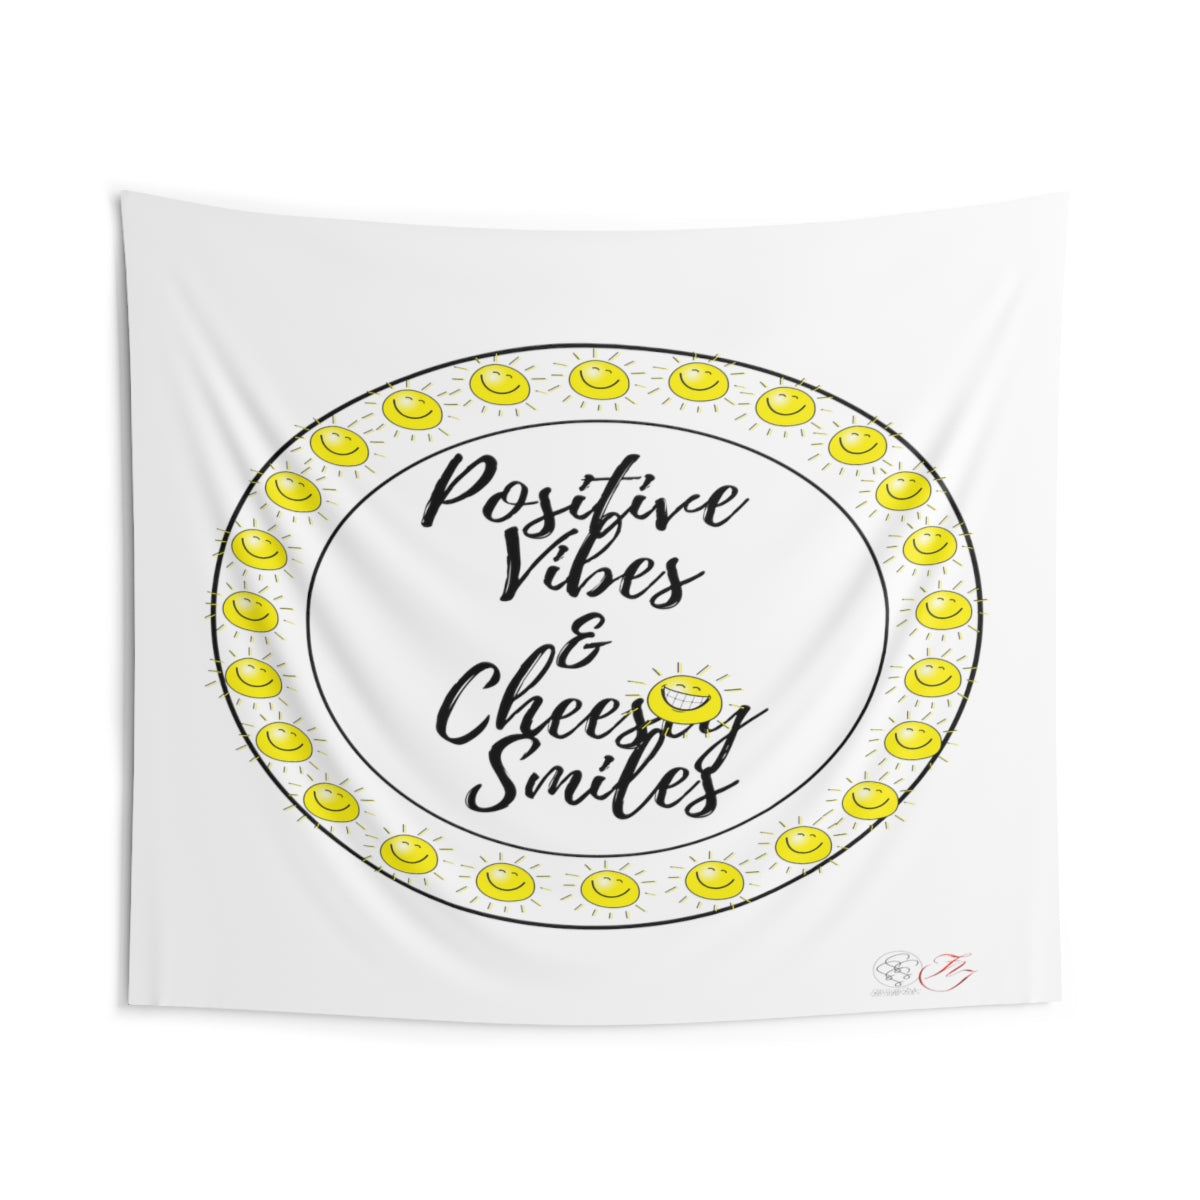 SSSS Positive Vibes & Cheesey Smiles Wall Tapestry - White (BL)